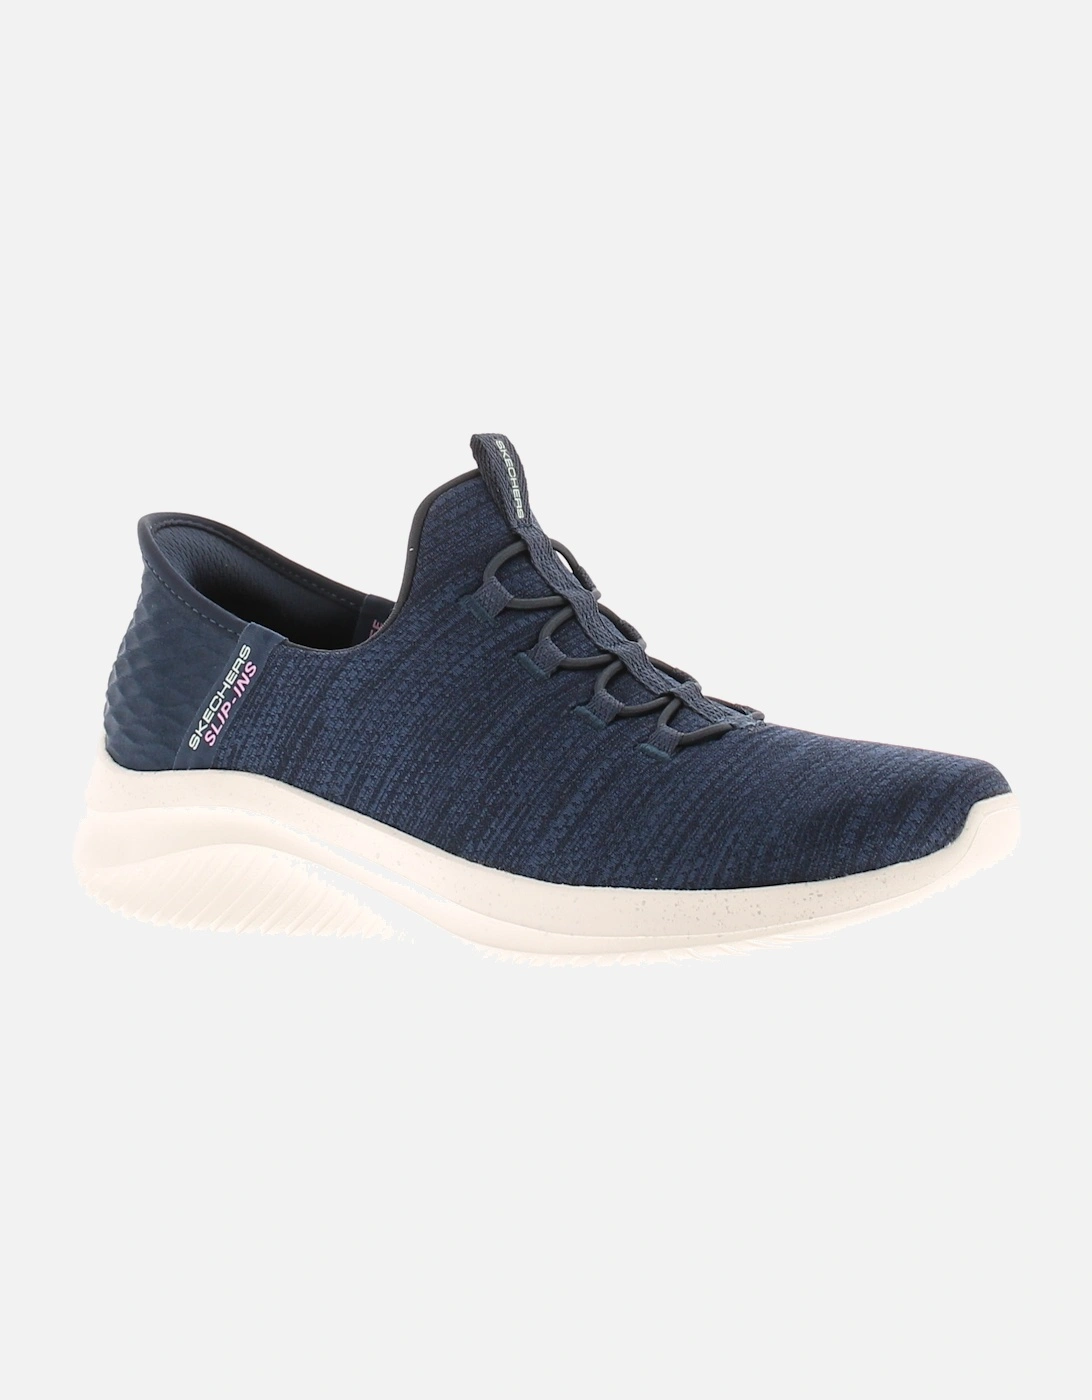 Womens Slip-Ins Trainers Ultra Flex 3 0 right Slip On navy UK Size, 6 of 5